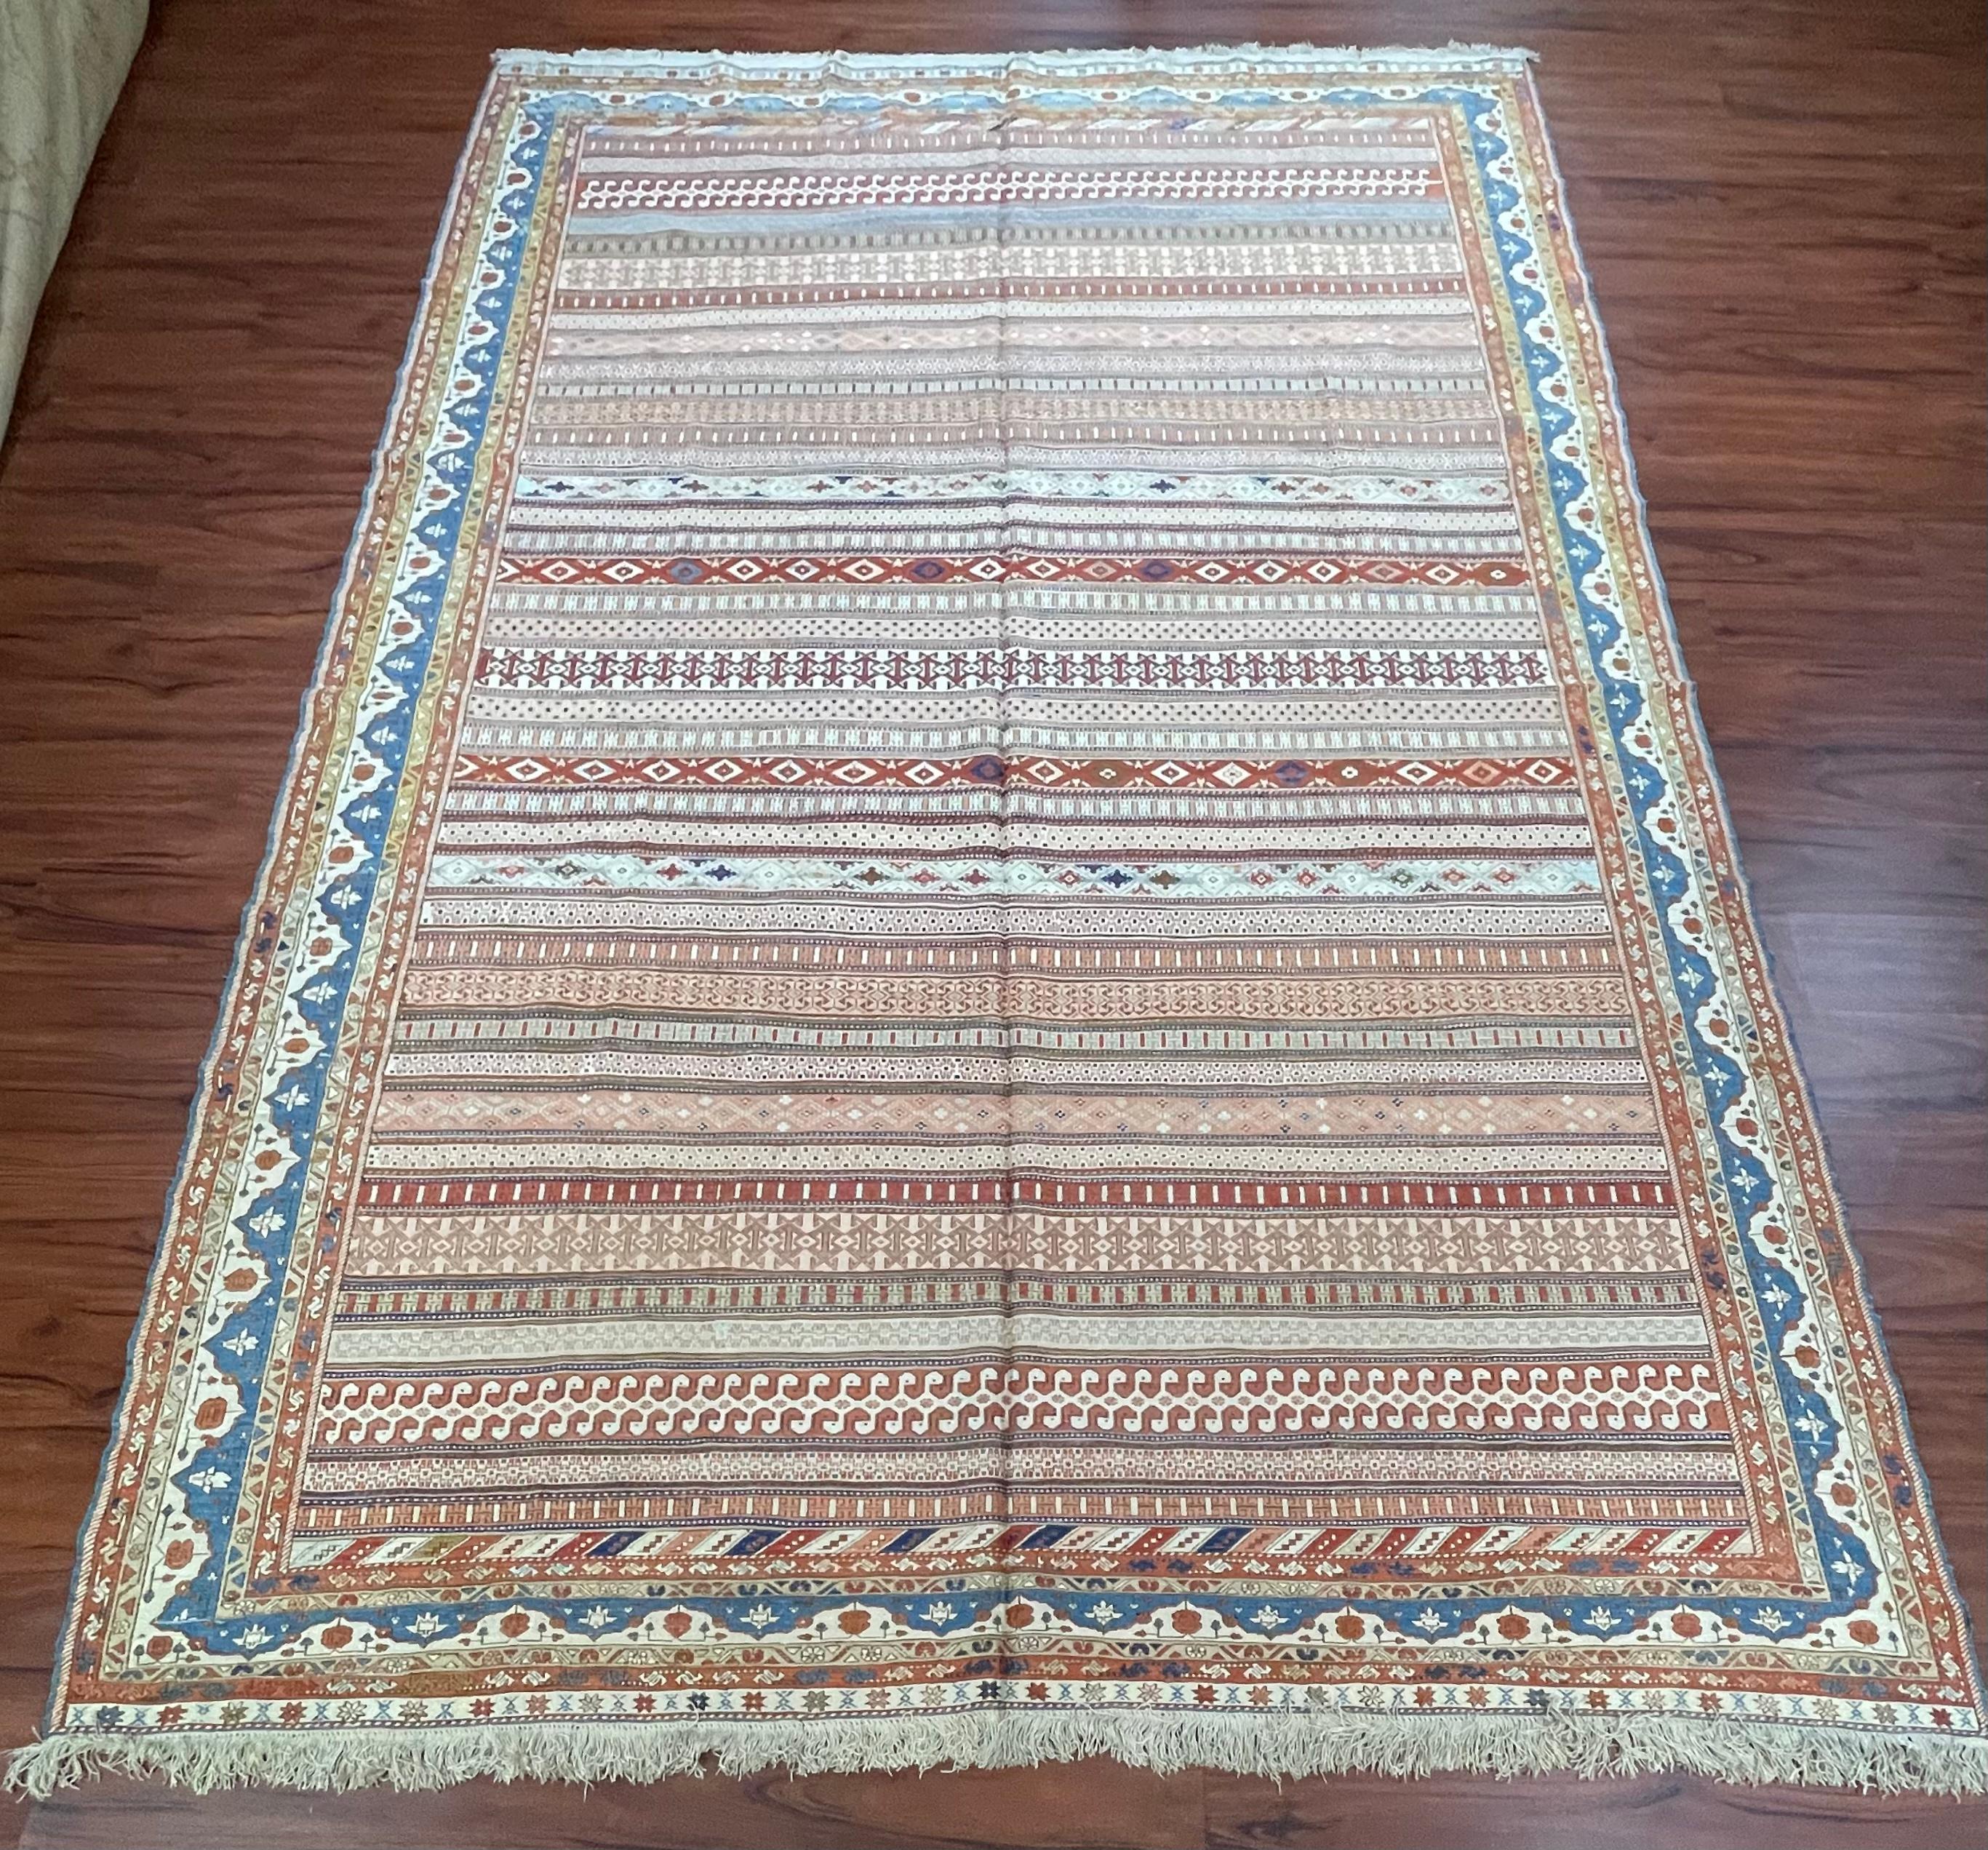 A stunning 100% Persian Silk Soumak Rug that originates from Iran in the late 20th Century. This piece is hand-knotted and in excellent condition. Feel free to message me regarding this item or any other that is listed on my page!